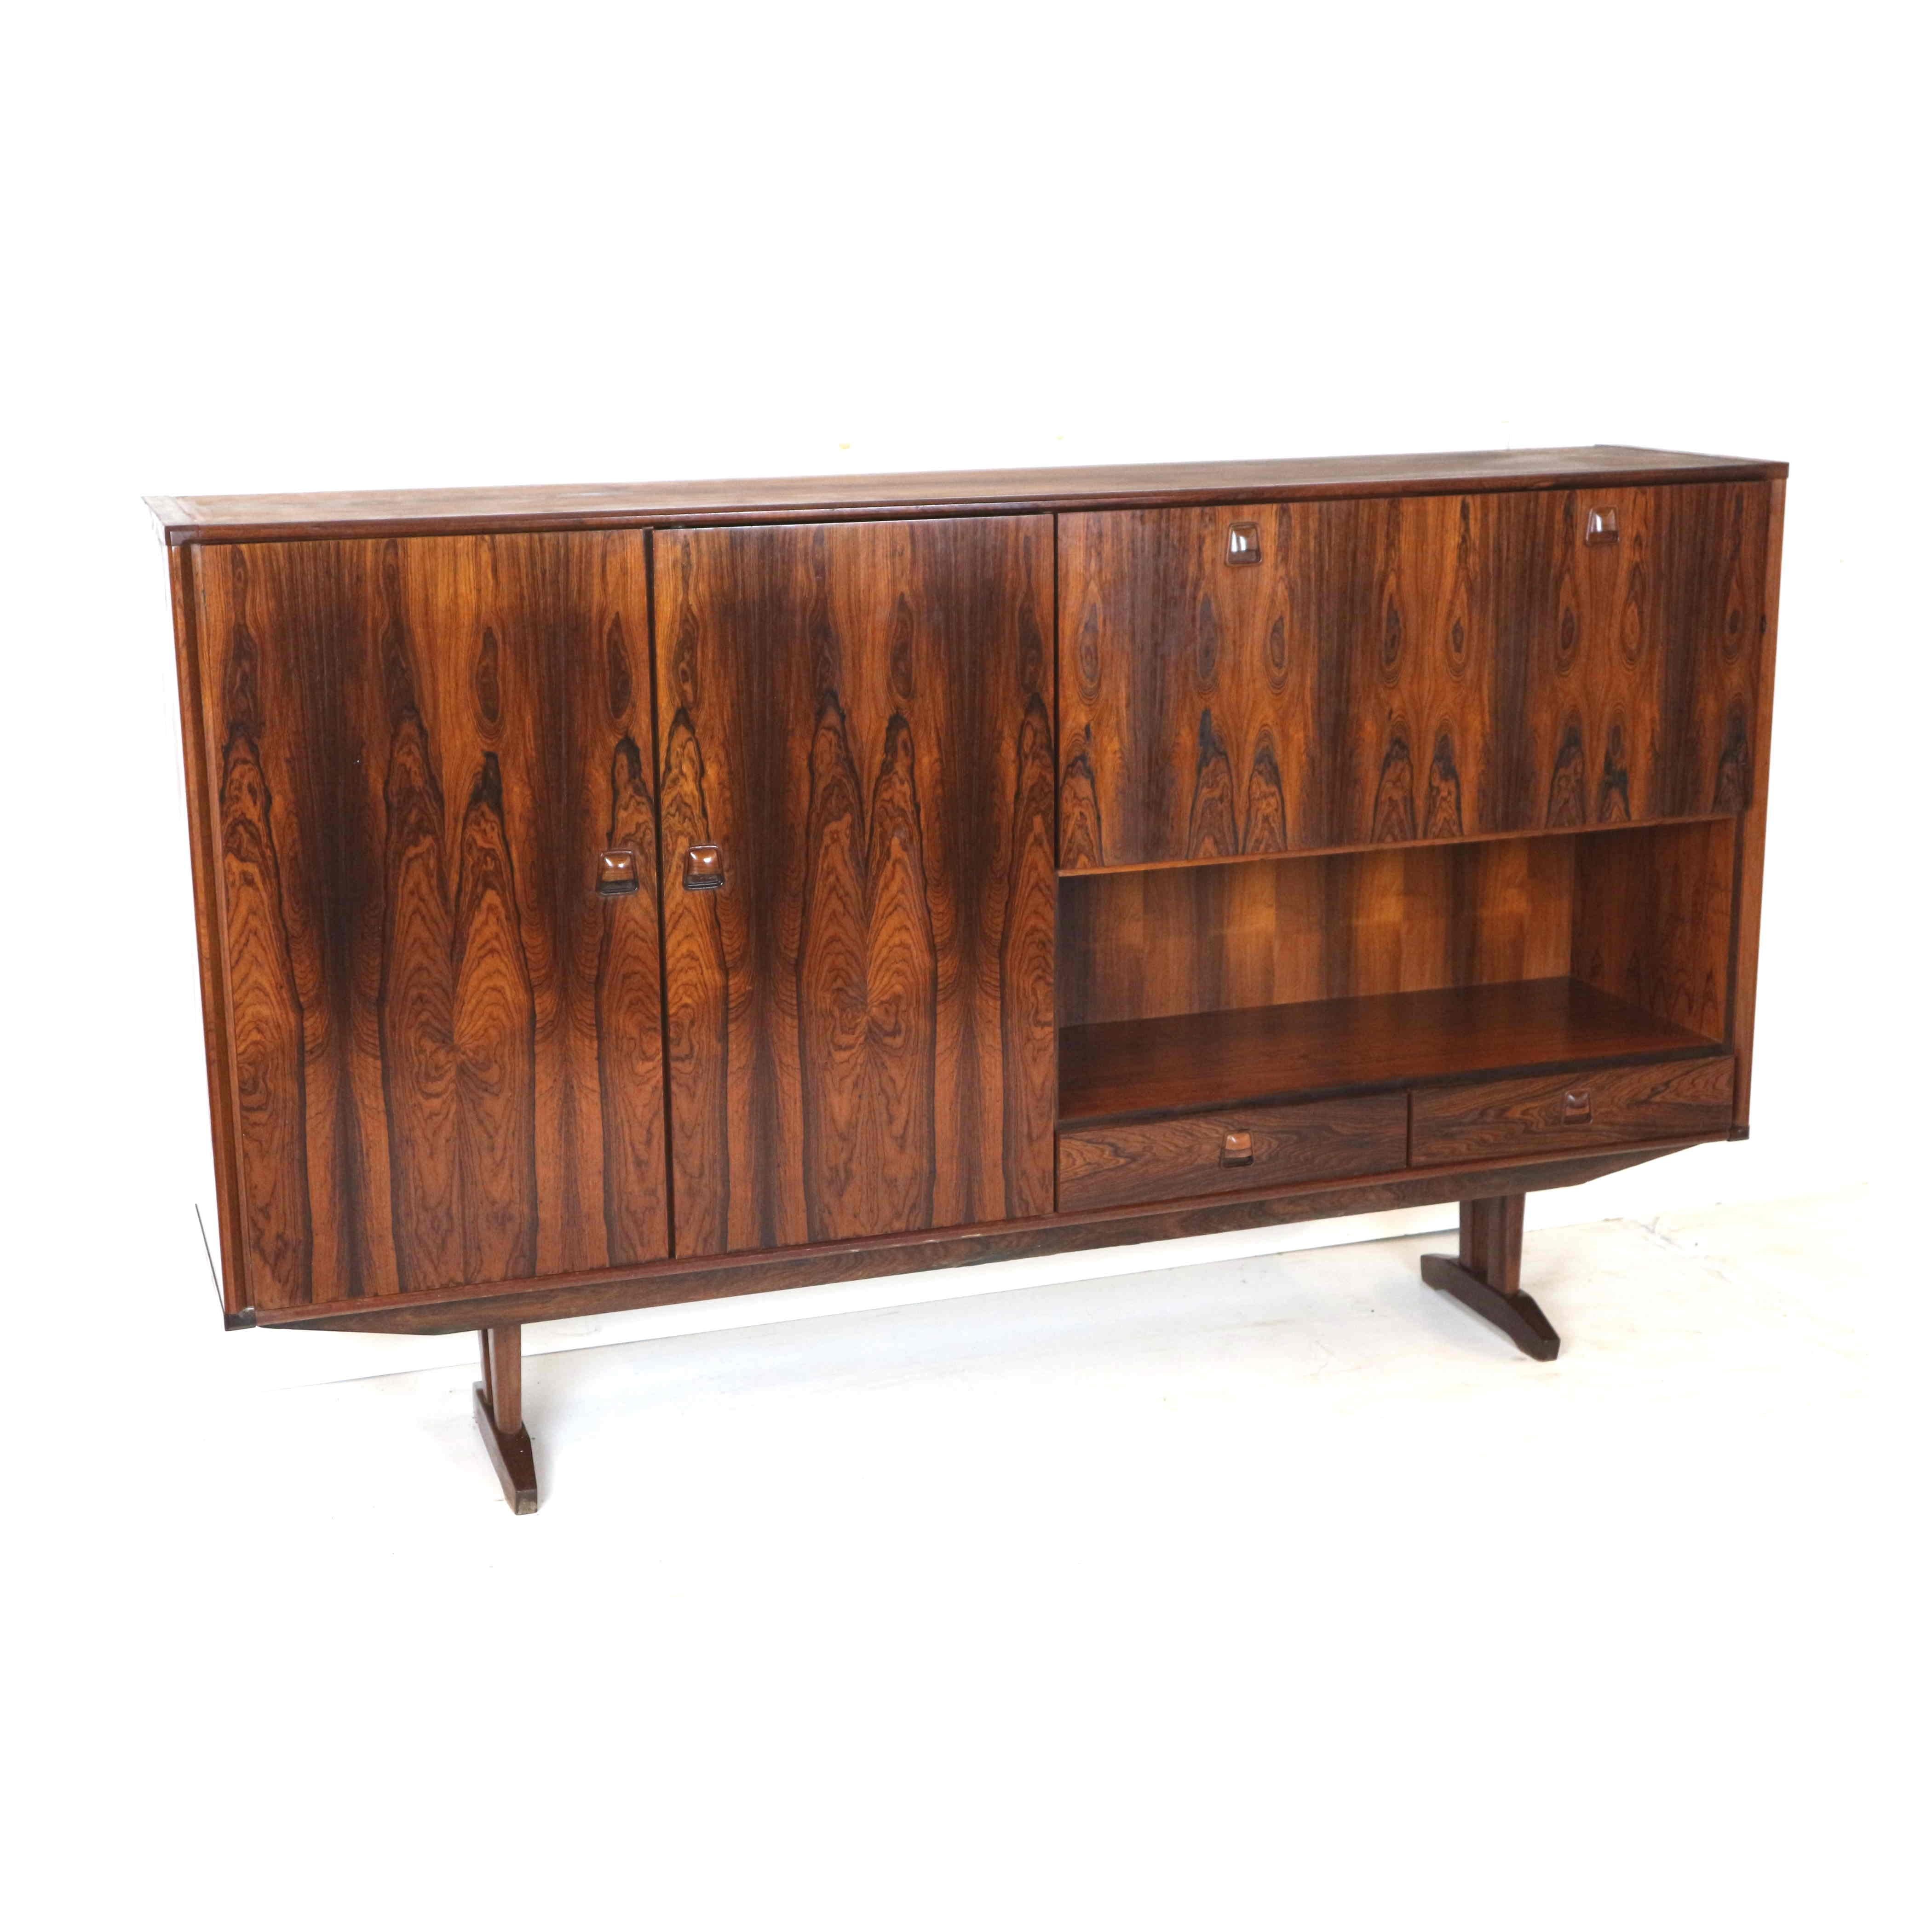 Vintage rosewood sideboard highboard from Topform made in the 60s.

Dimensions:
Width: 202 cm
Depth: 42.2
Height: 120.5 cm

The case has minor signs of use appropriate to its age. See the photos for this.